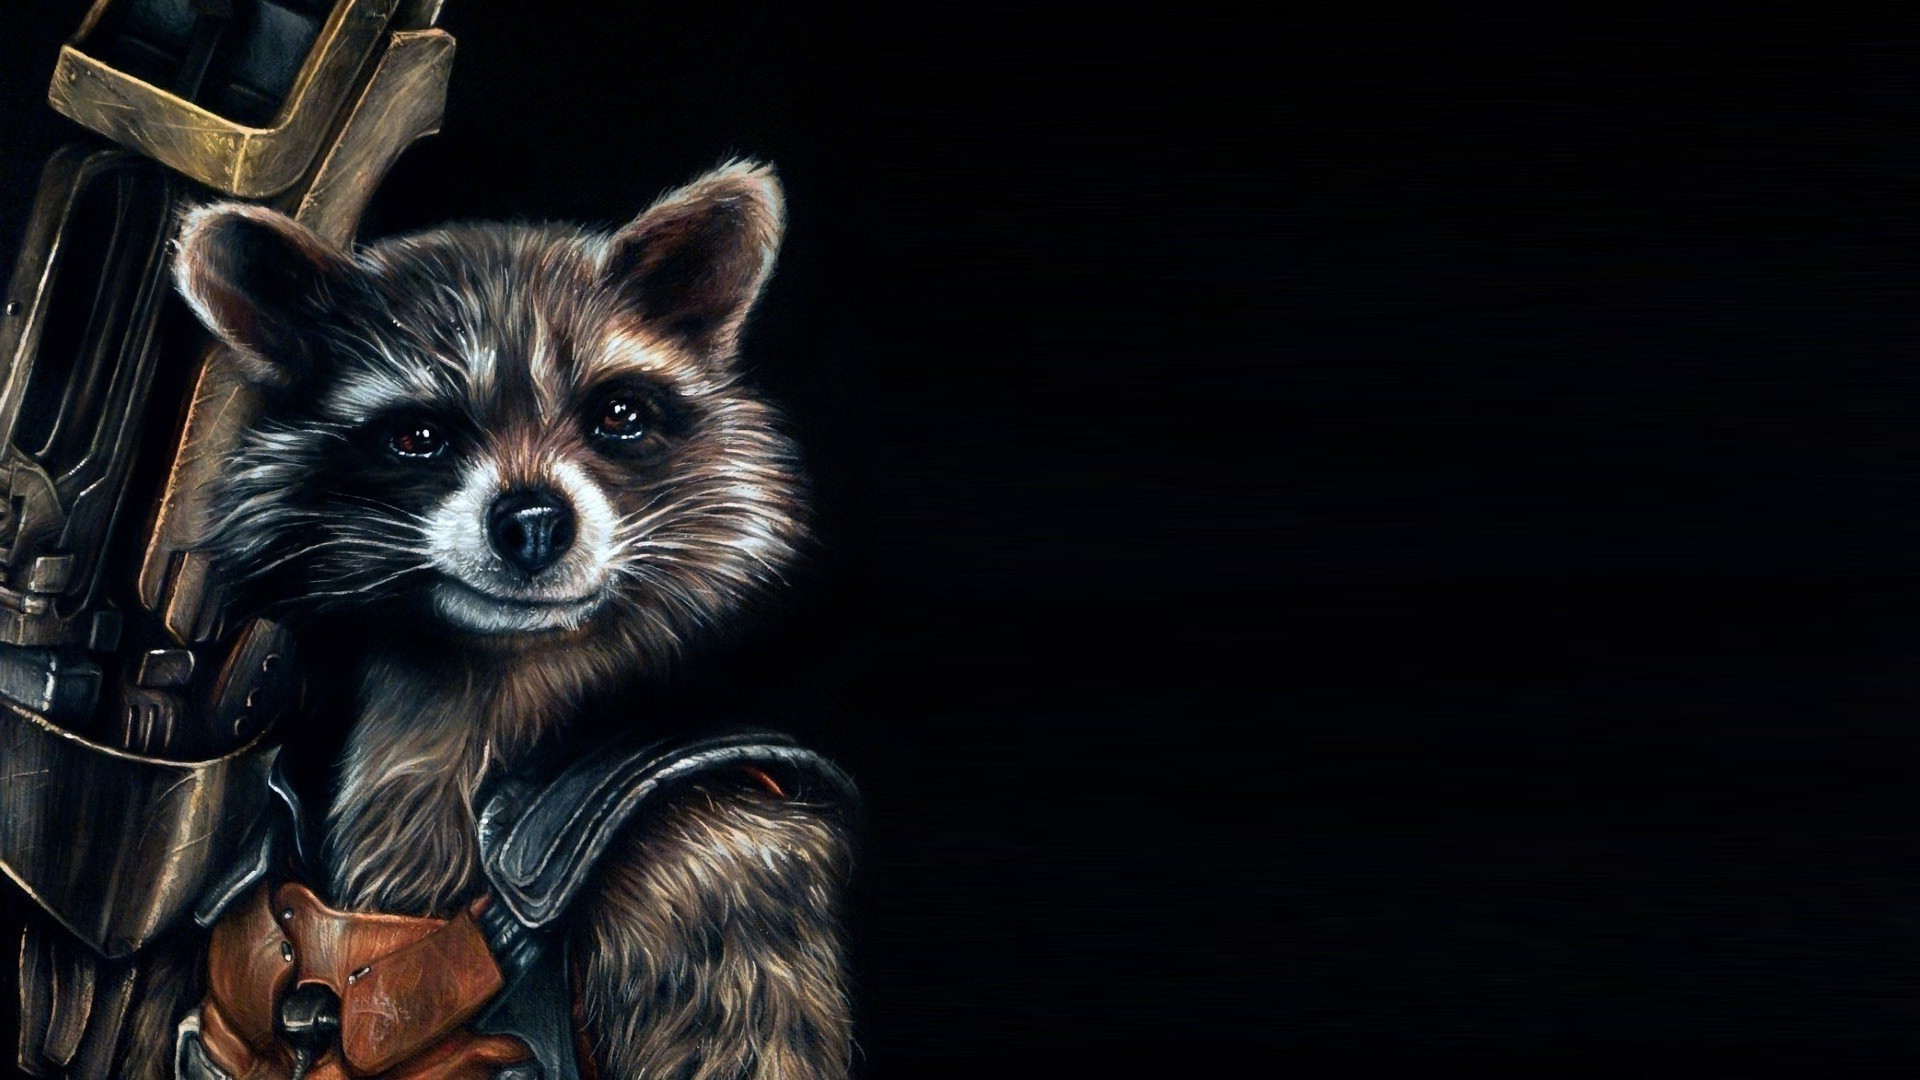 Guardians Of The Galaxy Comics Movies Rocket Raccoon Artwork Fictional Black Background Wallpapers Hd Desktop And Mobile Backgrounds 1920x1080